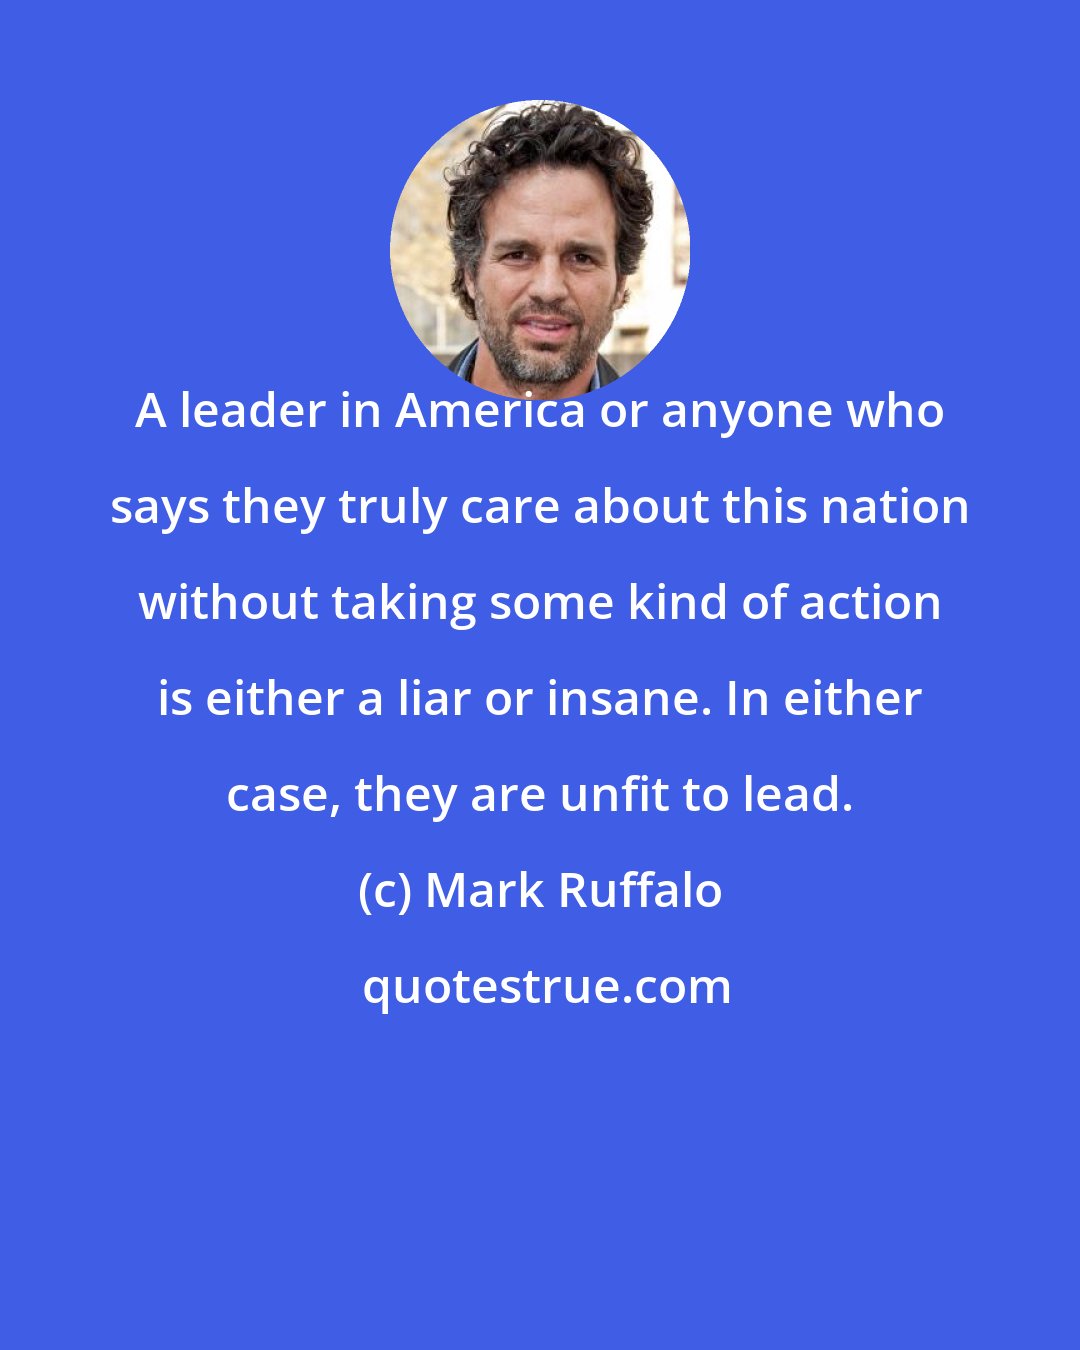 Mark Ruffalo: A leader in America or anyone who says they truly care about this nation without taking some kind of action is either a liar or insane. In either case, they are unfit to lead.